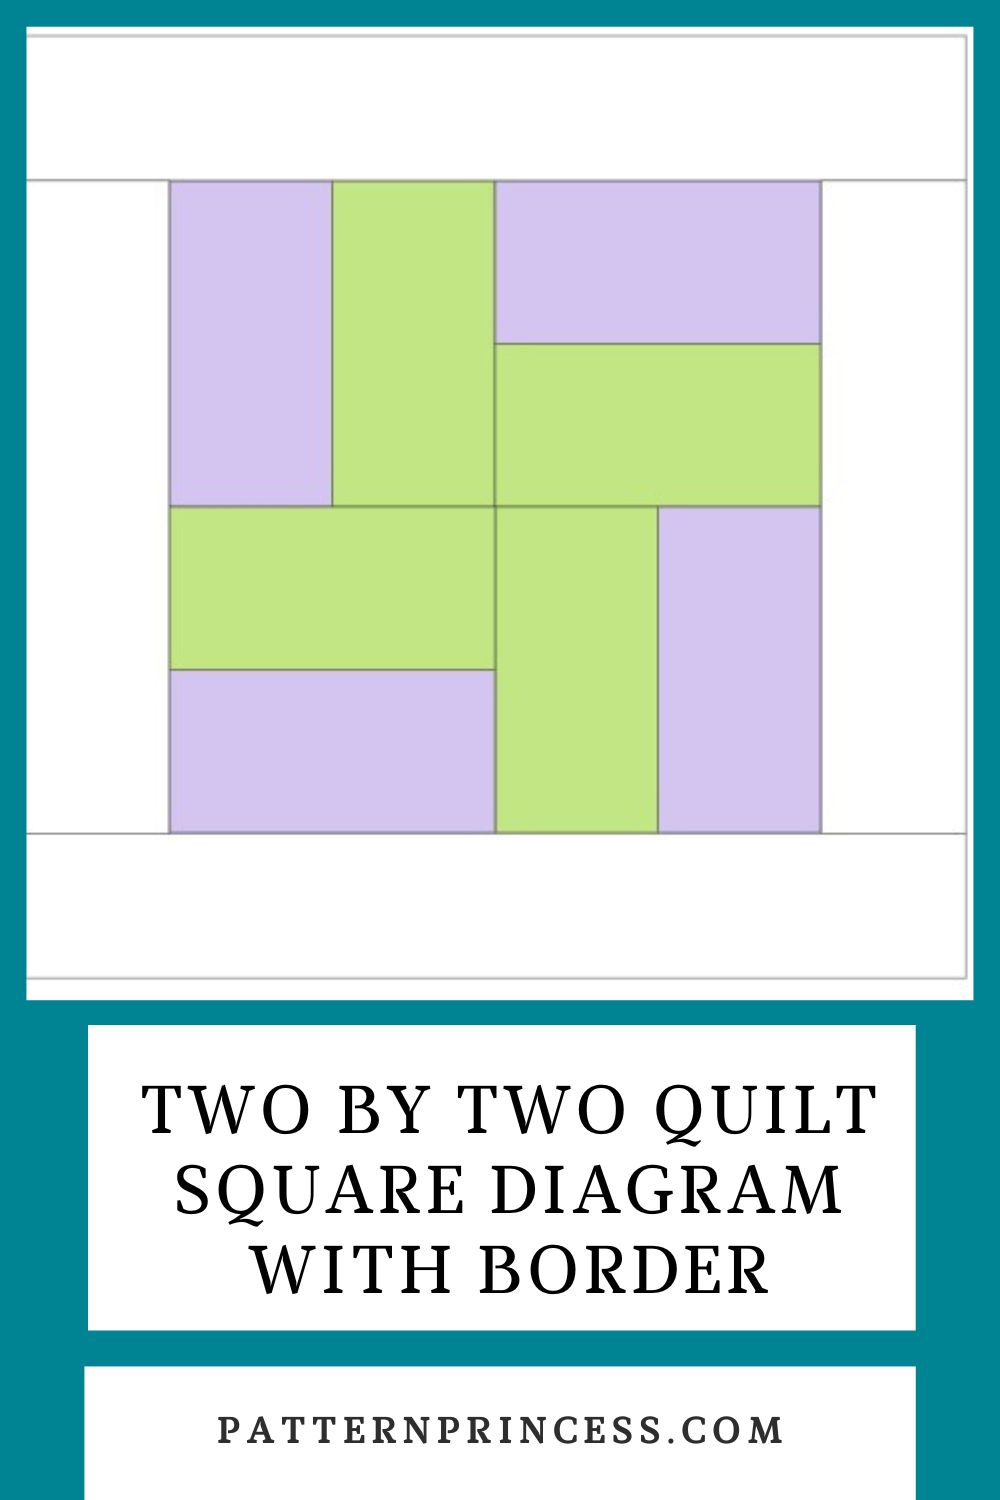 Two by Two quilt square diagram with border